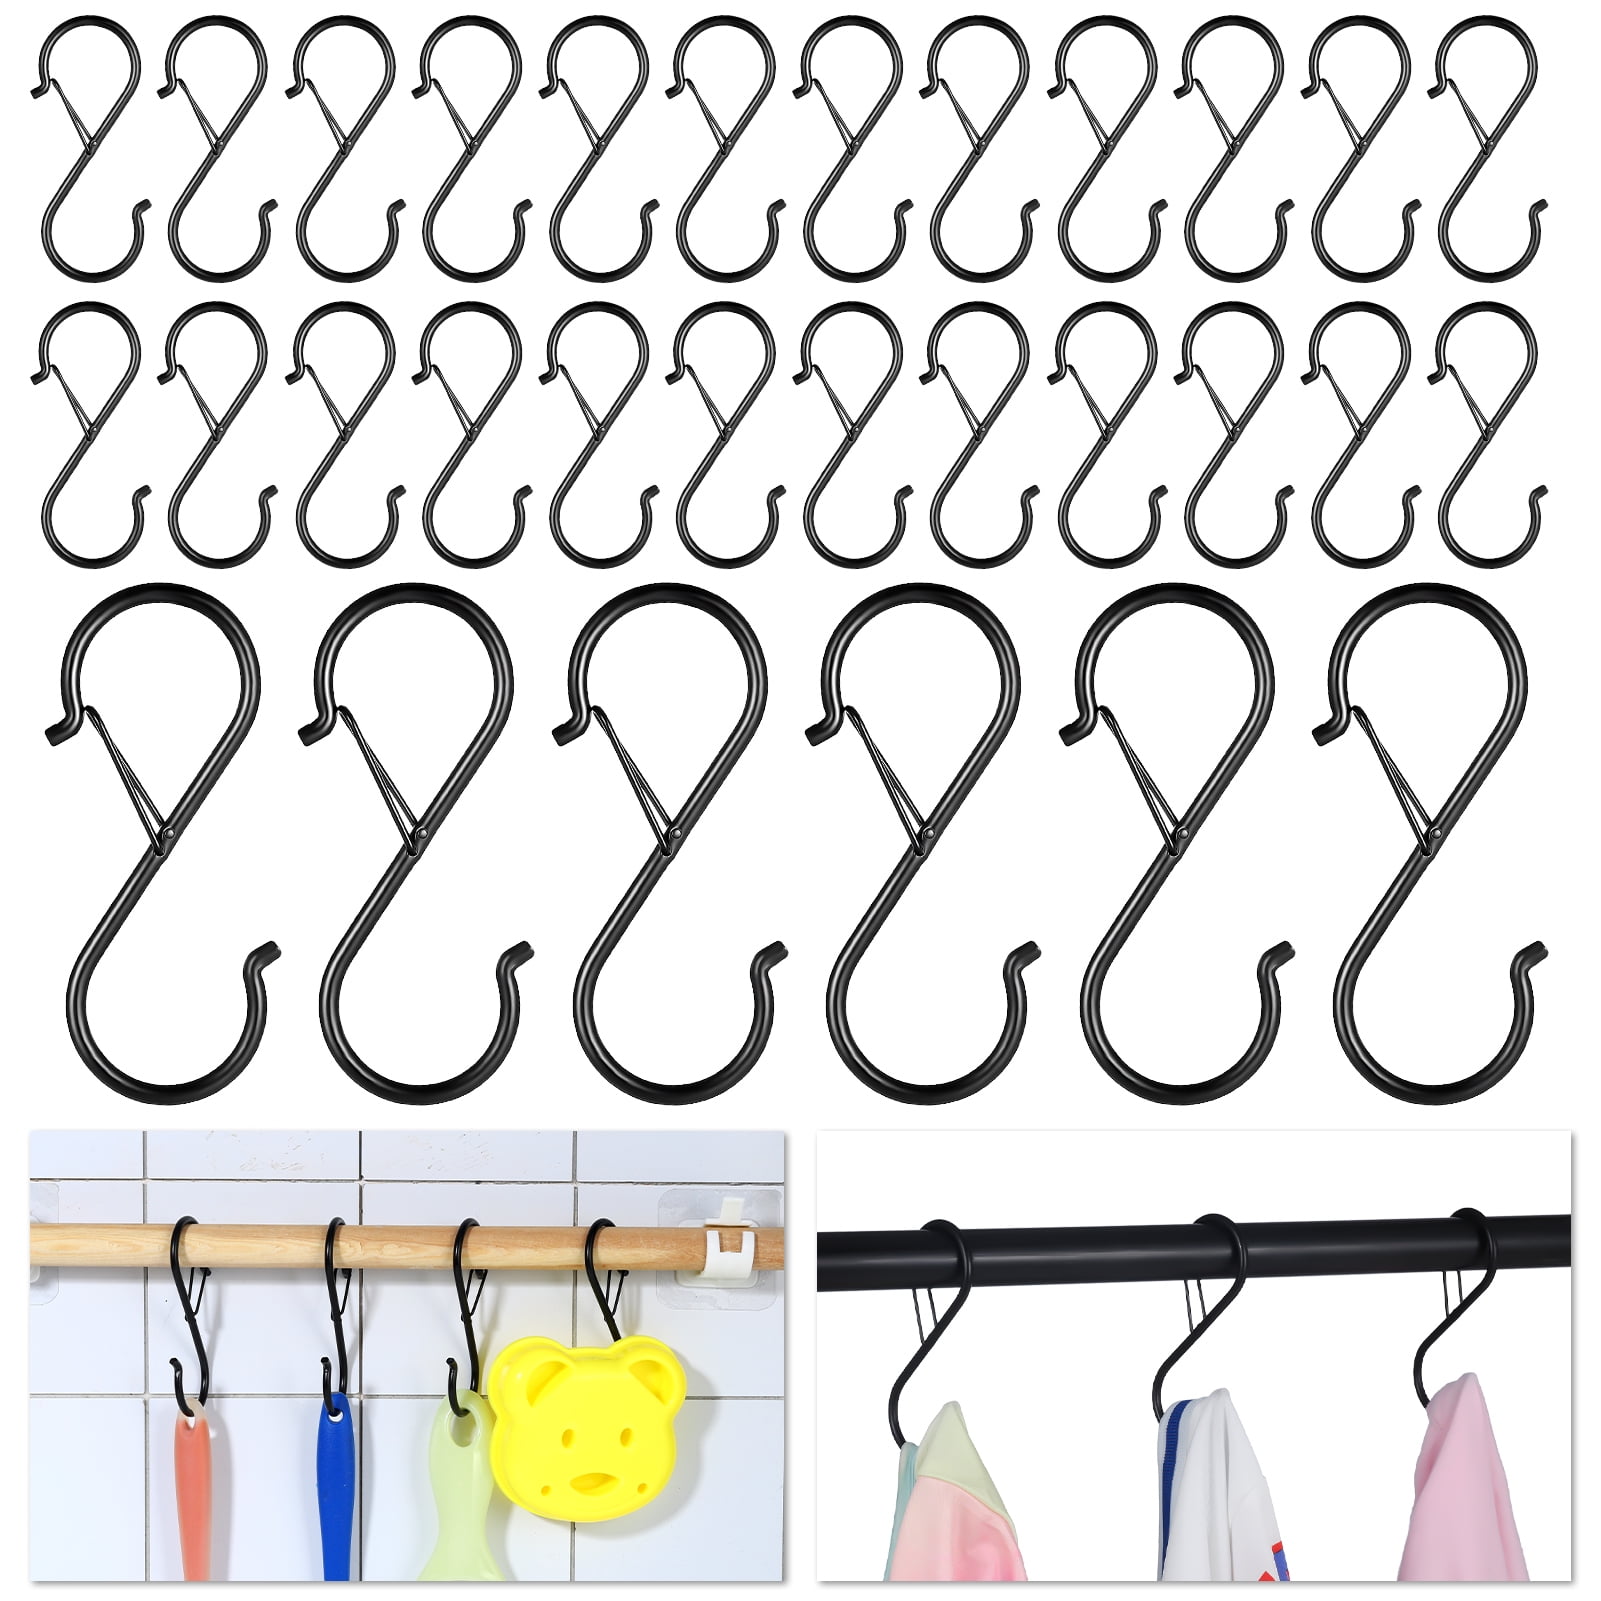 DINGEE 6 inch Long S Hooks Heavy Duty Non-Slip Vinyl Coated (6 Pack) Black  Metal Steel Large S Hooks for Hanging Plants Closet Rod Jeans Plants  Jewelry Kitchen Pot Pan Cups Towels